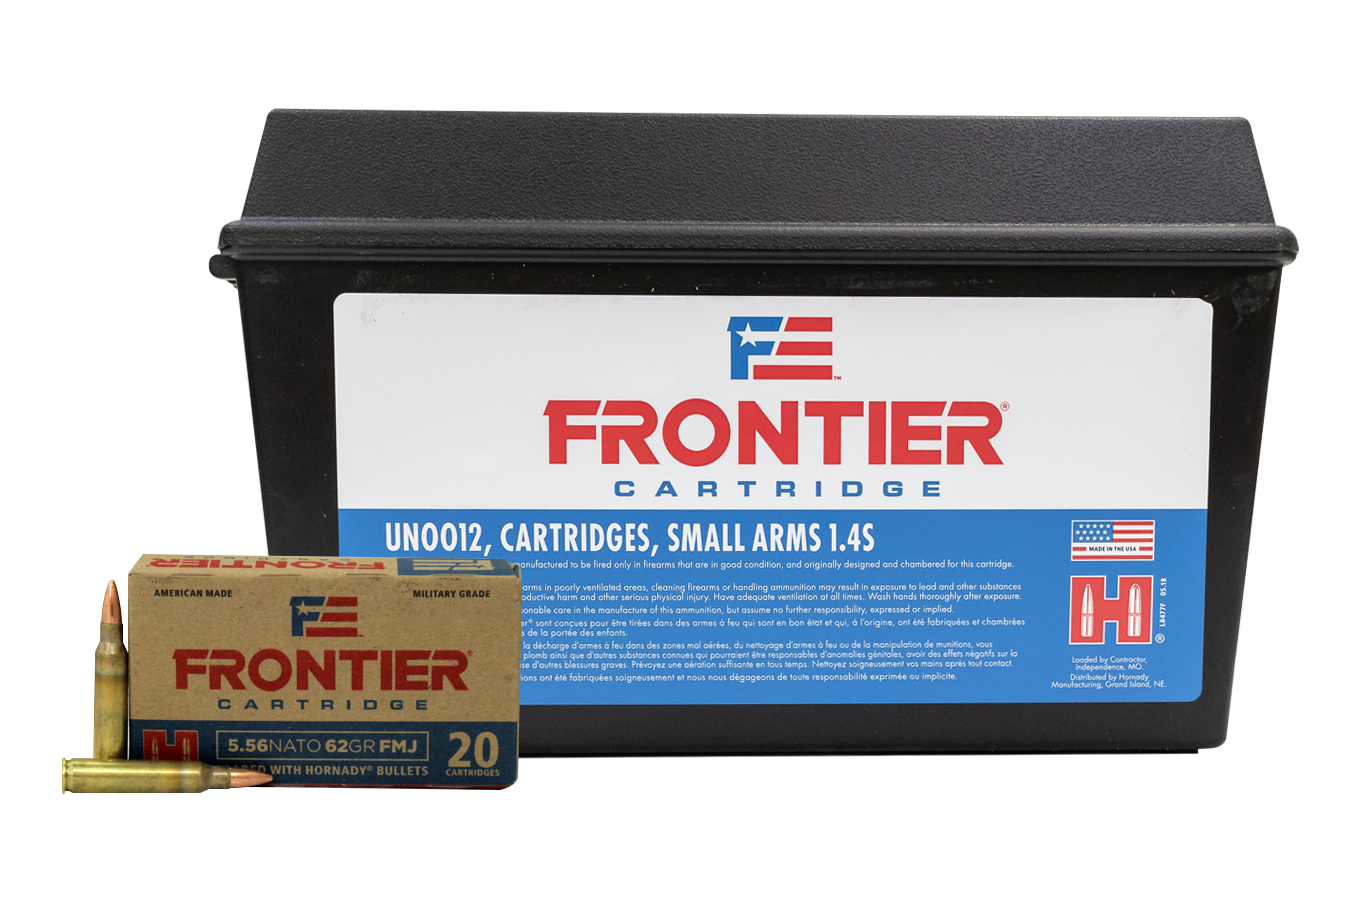 HORNADY 5.56 NATO 62 FMJ 420 RD AMMO CAN FRONTIER 